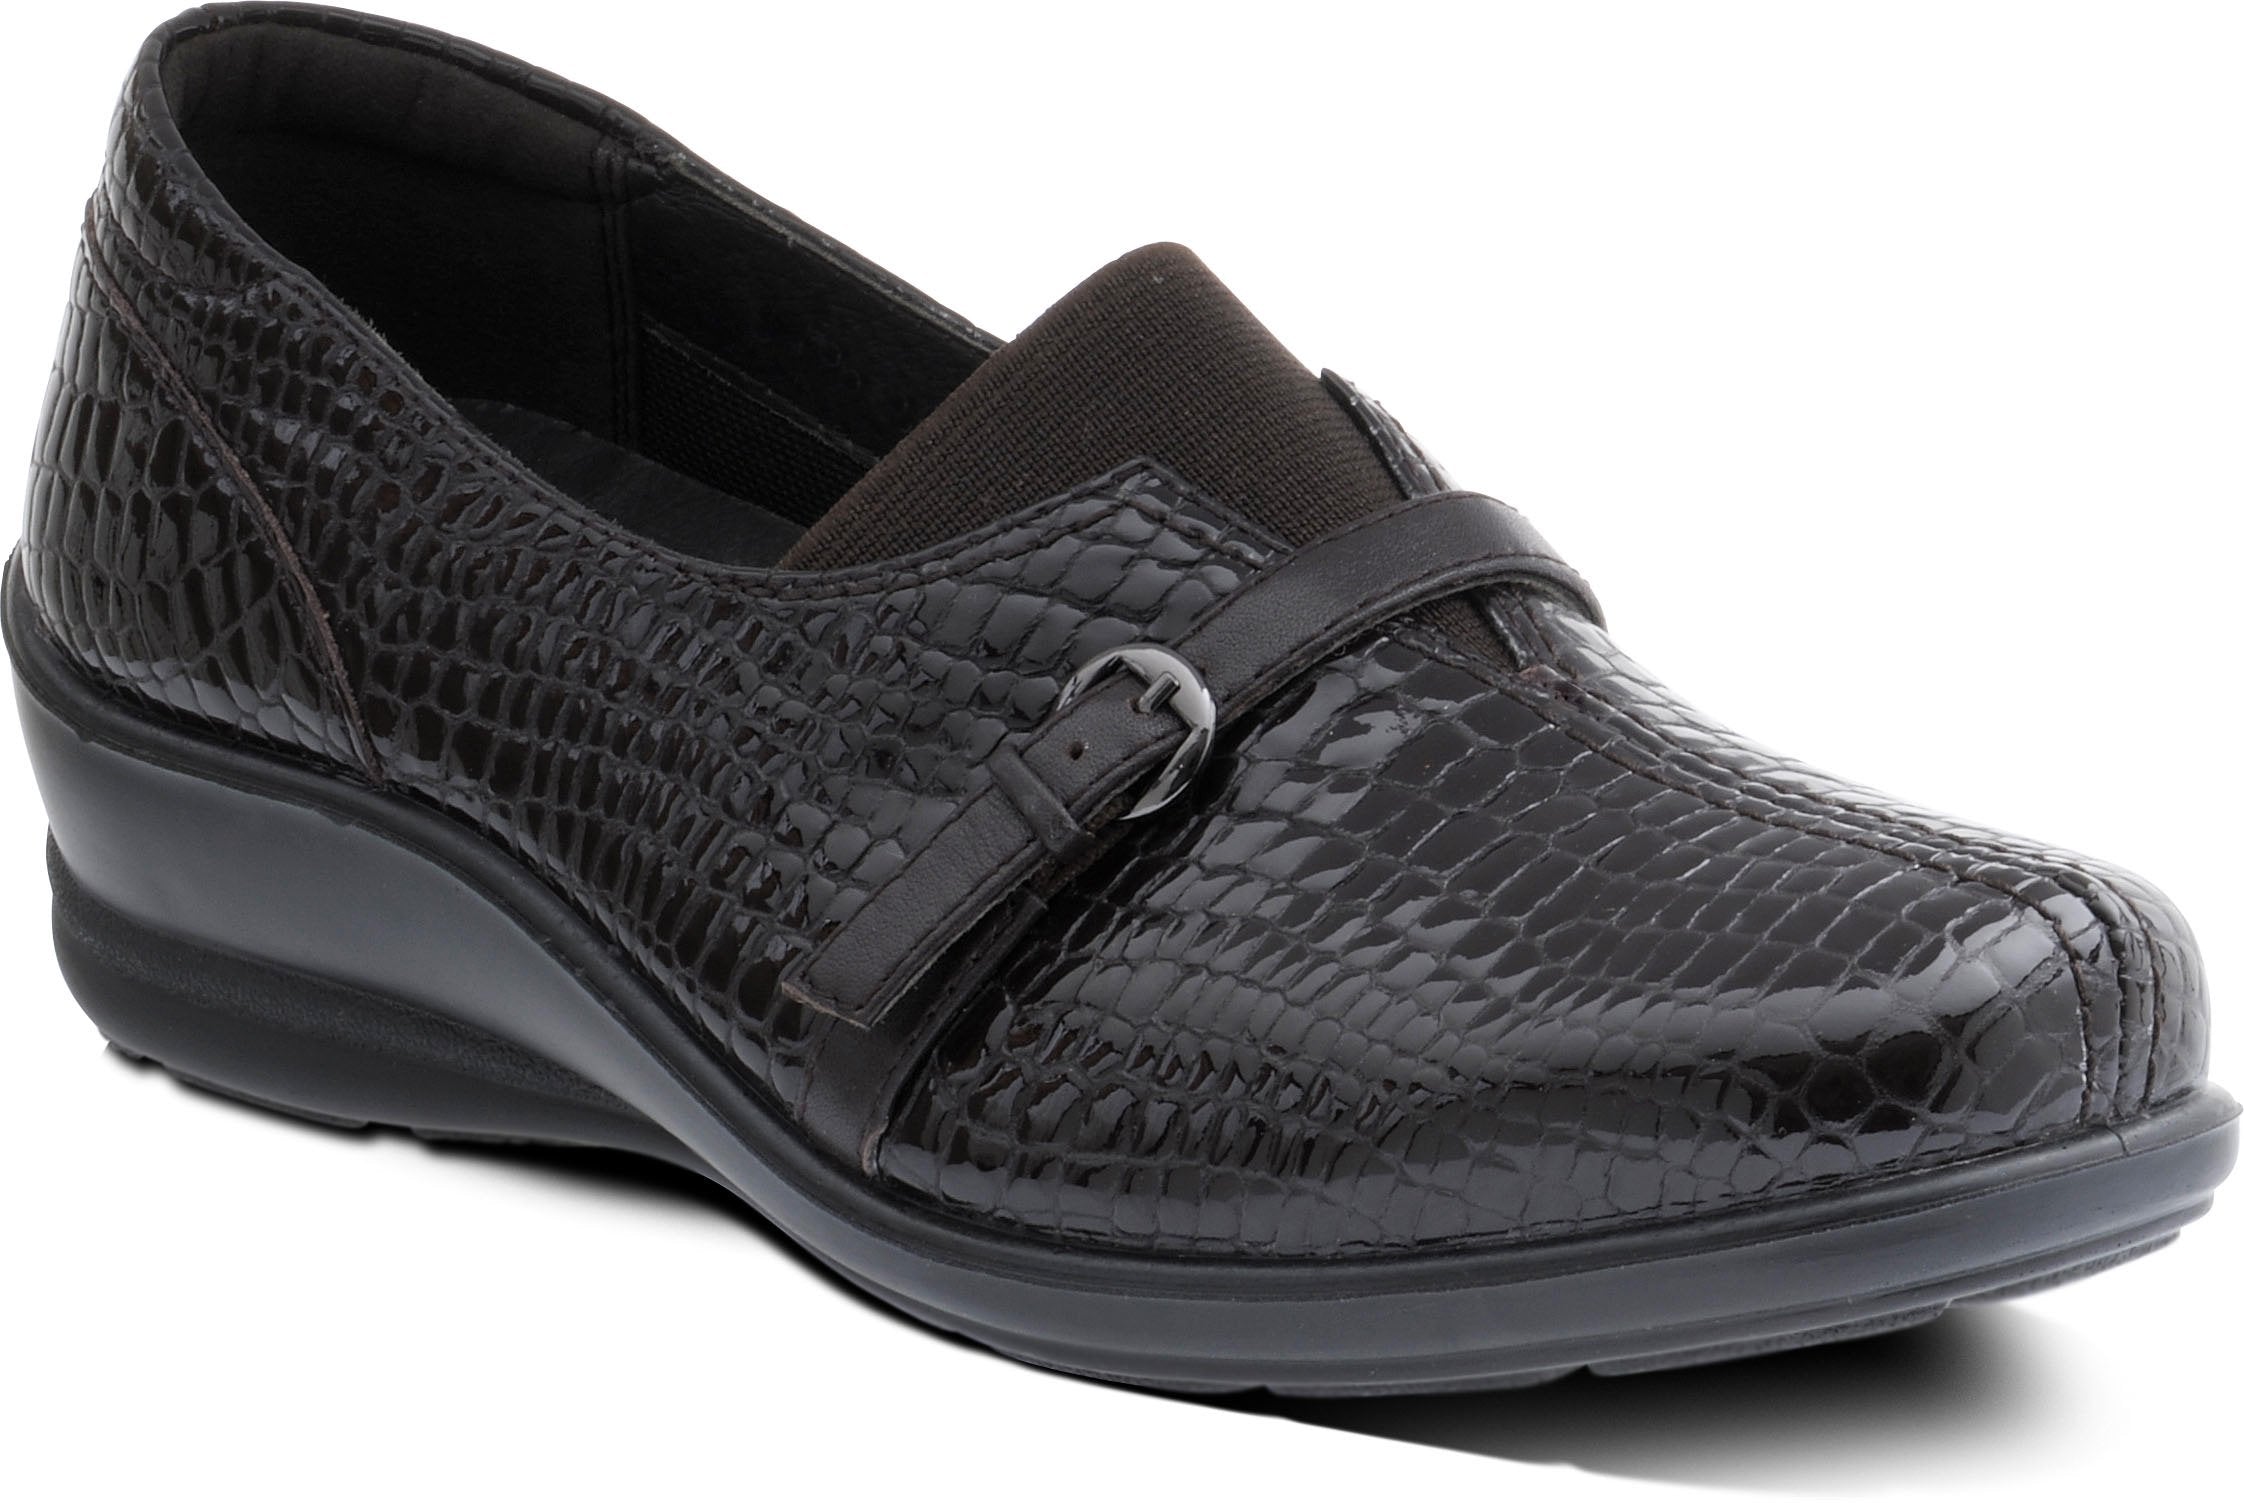 Padders Shelley Brown Croc Shoes Wider Fitting - elevate your sole